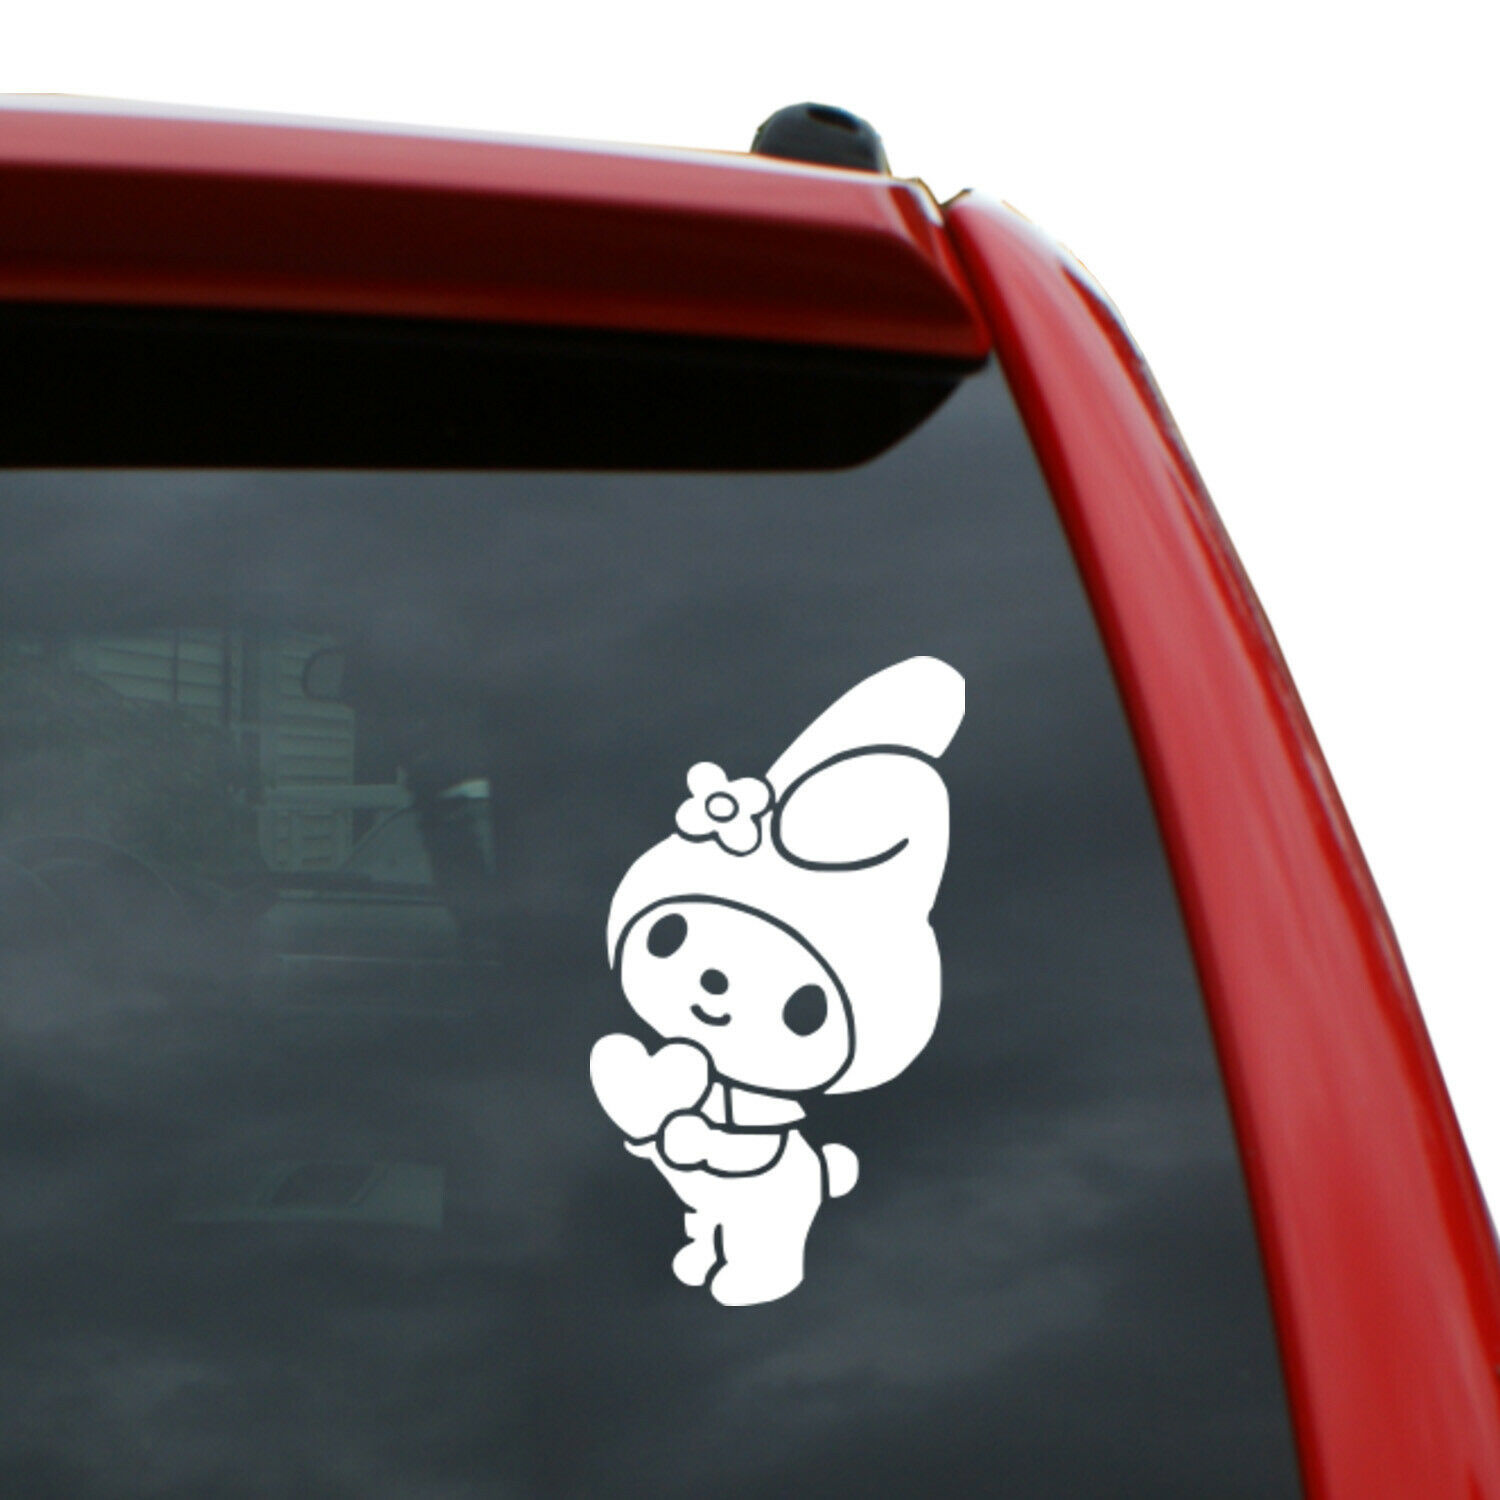 Black Heart Decals & More - My melody vinyl decal | 5